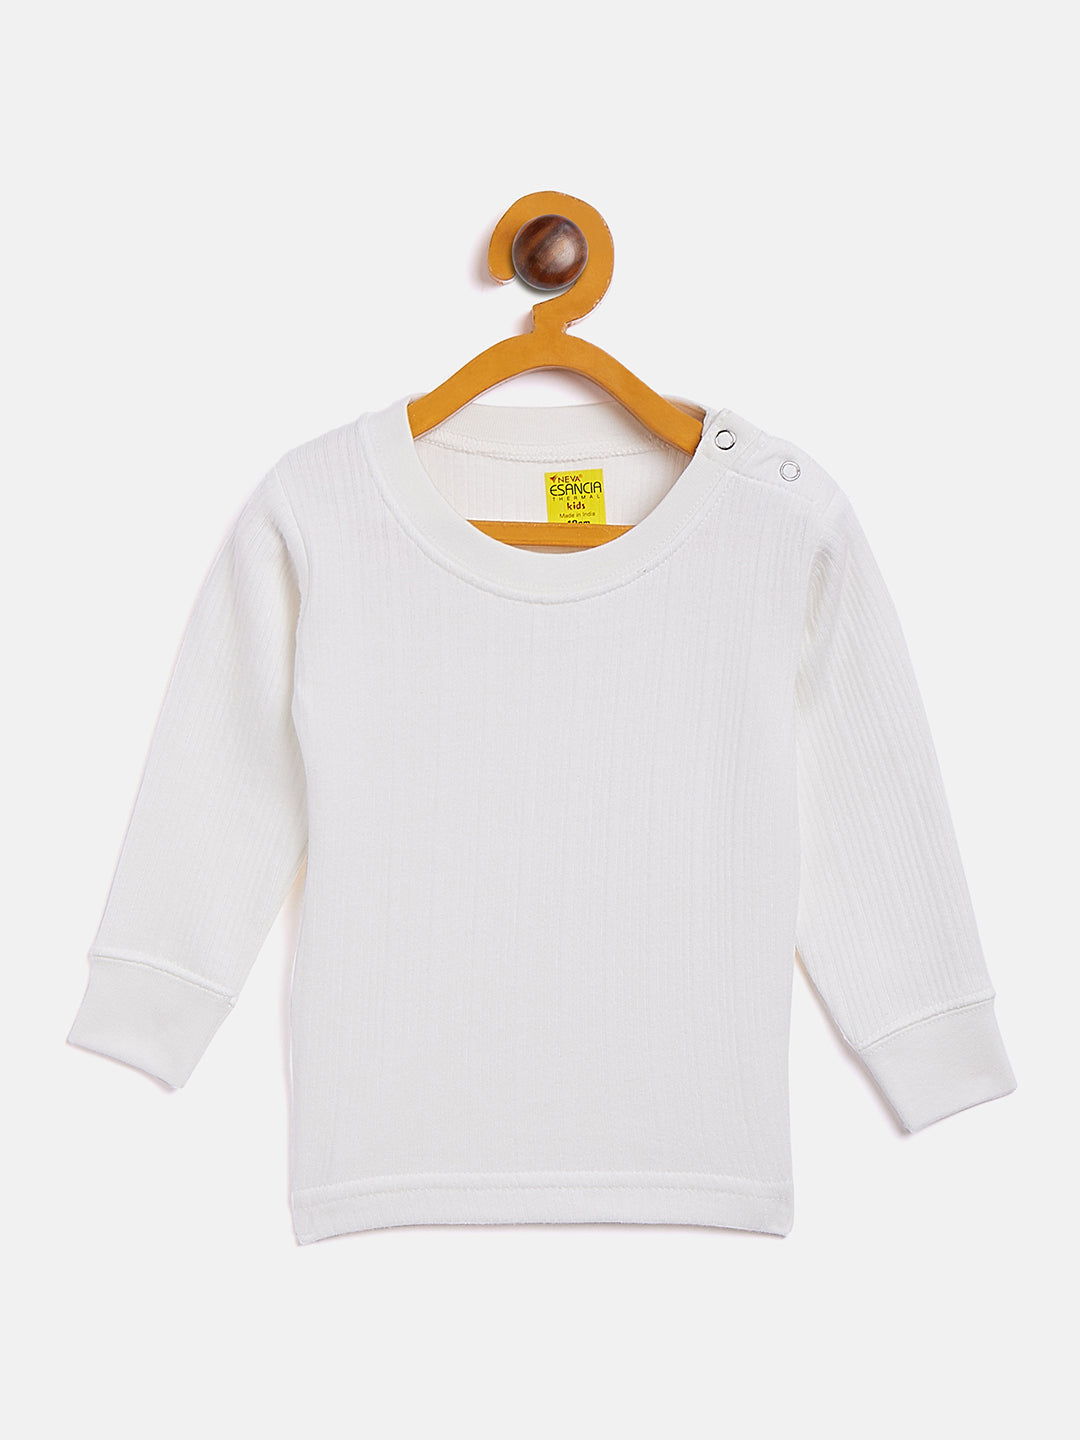 Neva Kids Unisex (Boys and Girls) 2 Uppers Combo Set Esancia Thermal- 1 Anthra and 1 Off White